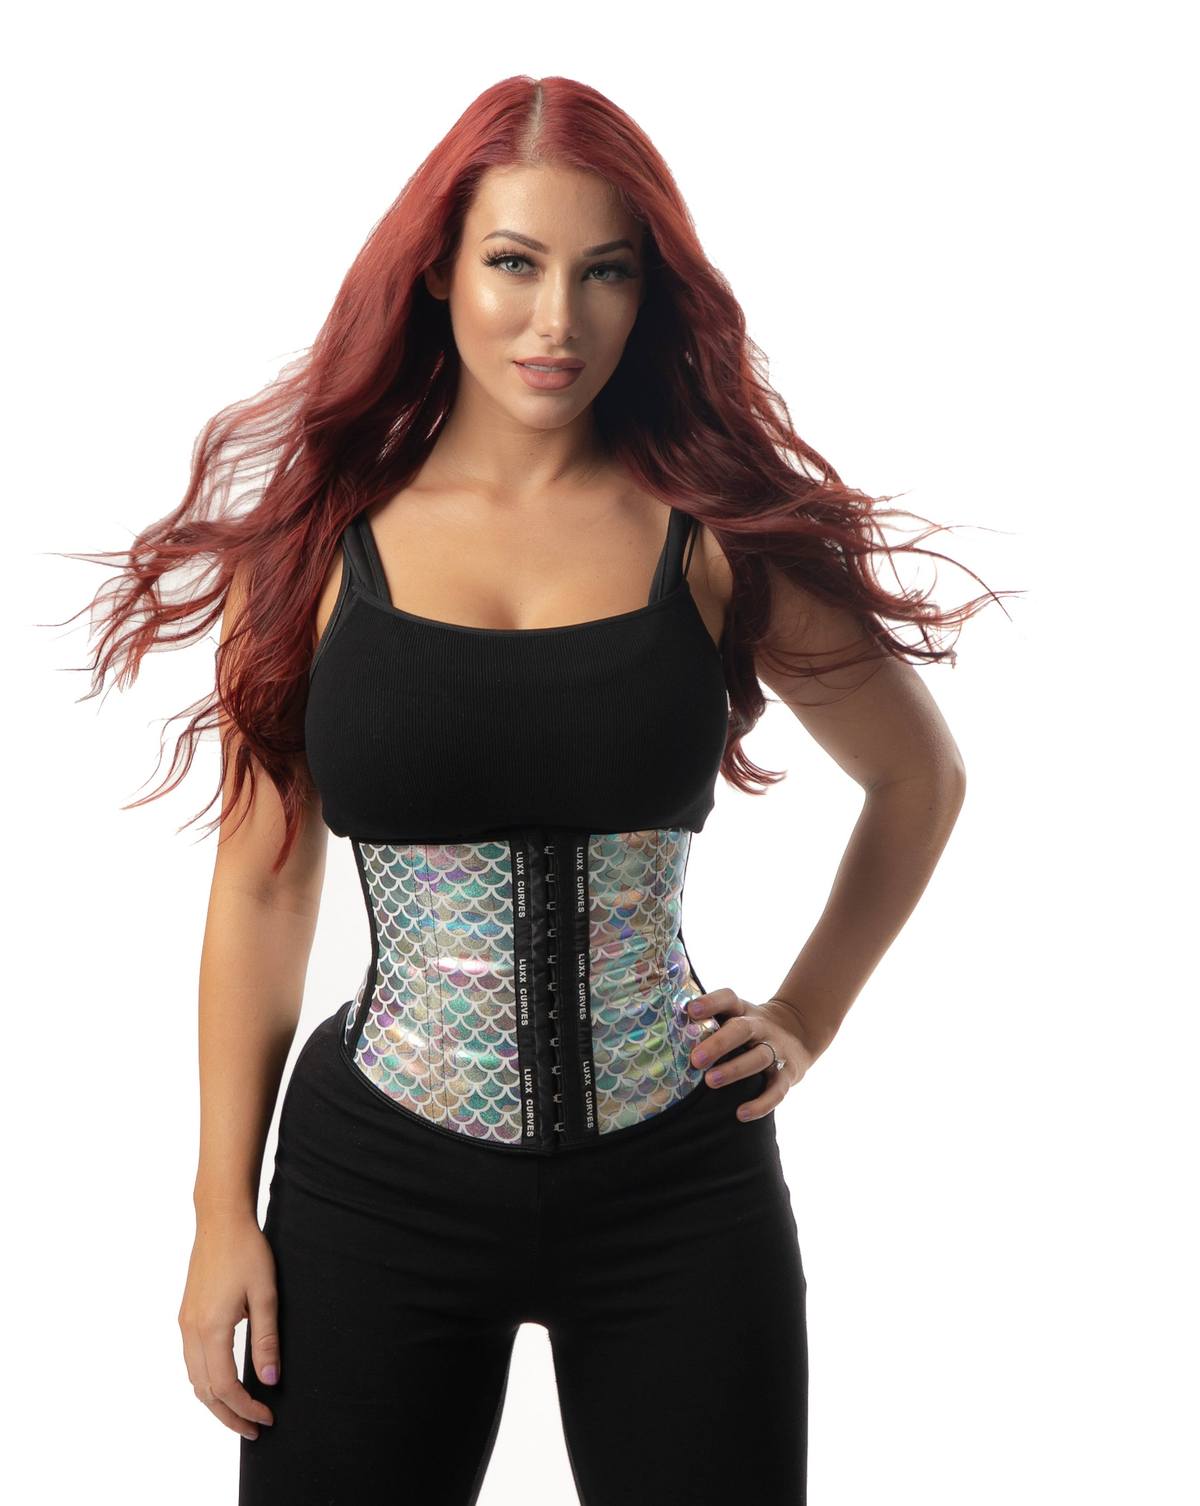 Clearance - Perfect Curves™ Waist Trainers - Extra Large / Odd Sizes / Older Patterns